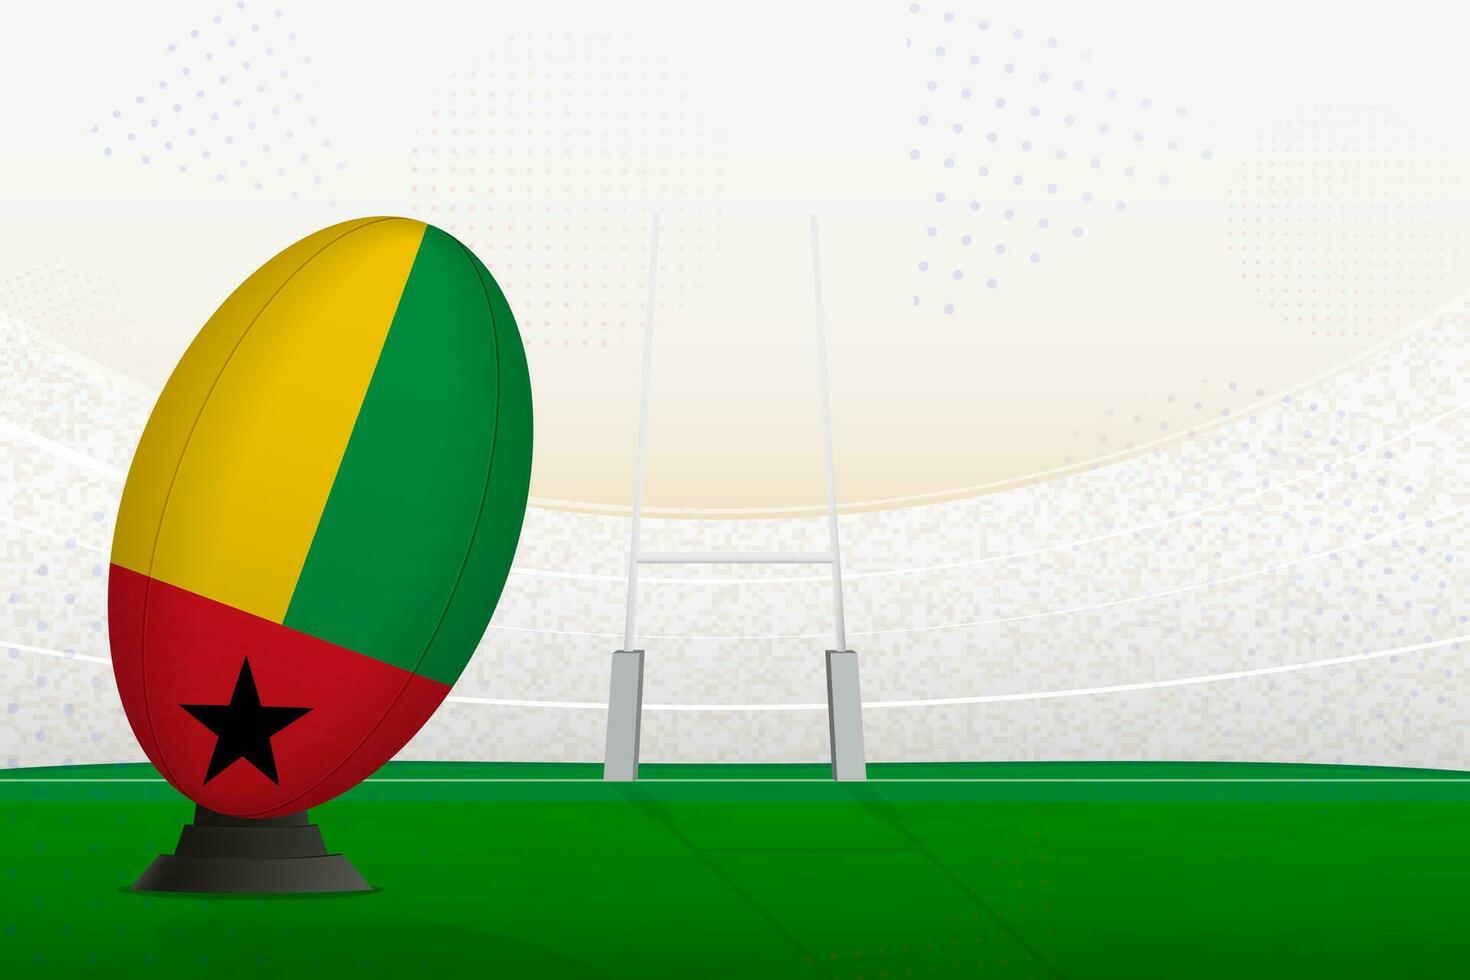 Guinea-Bissau national team rugby ball on rugby stadium and goal posts, preparing for a penalty or free kick. vector